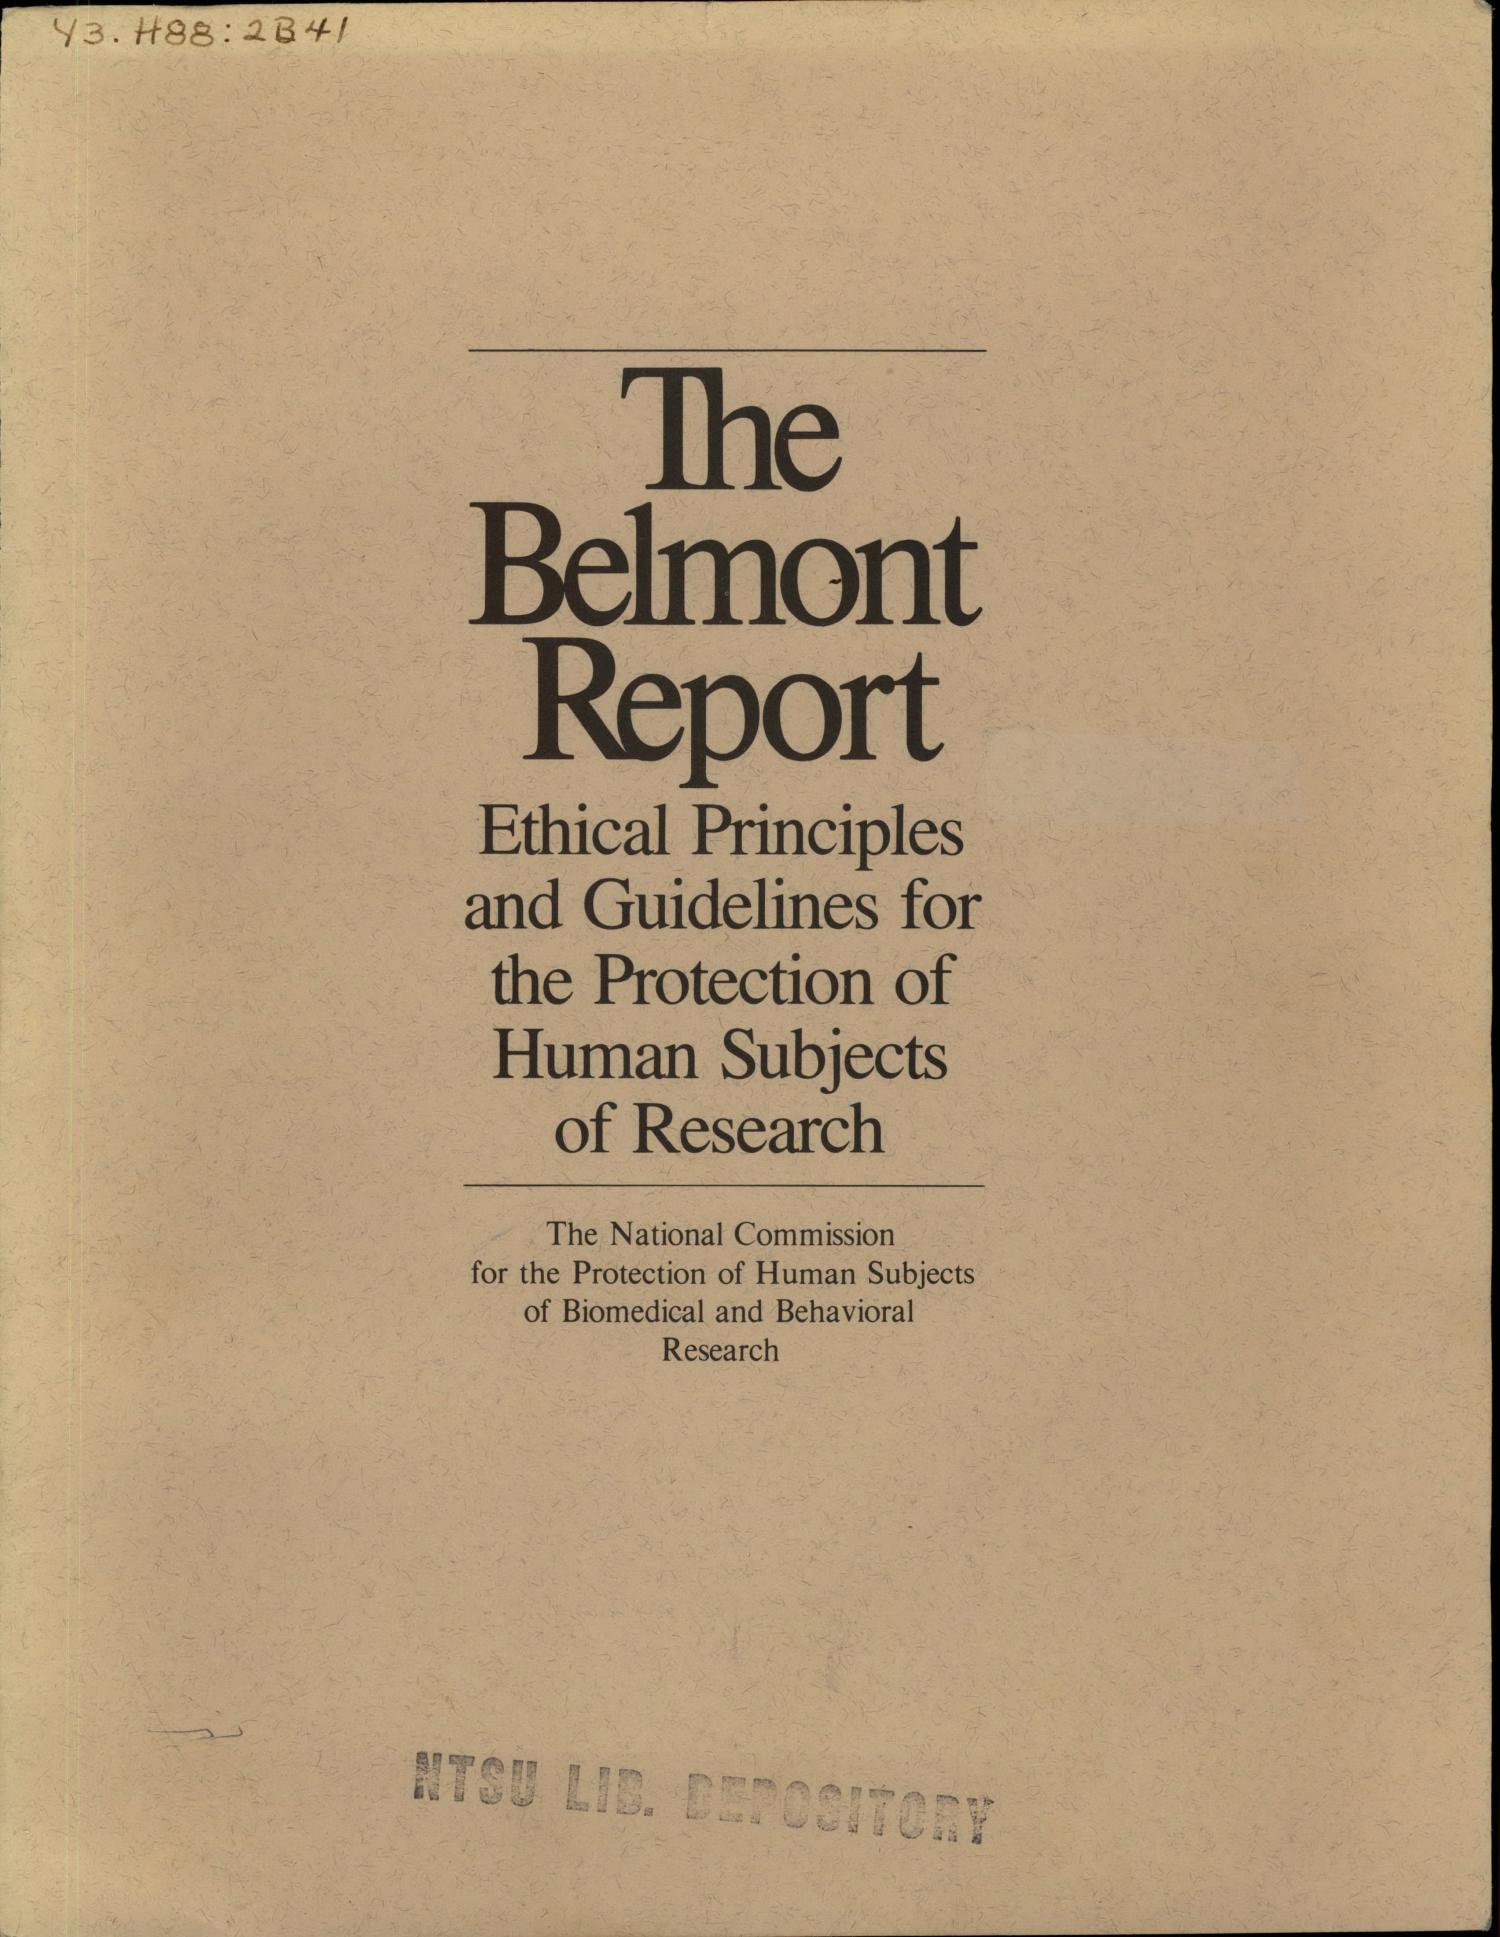 Title page of an original archived copy of the Belmont Report.